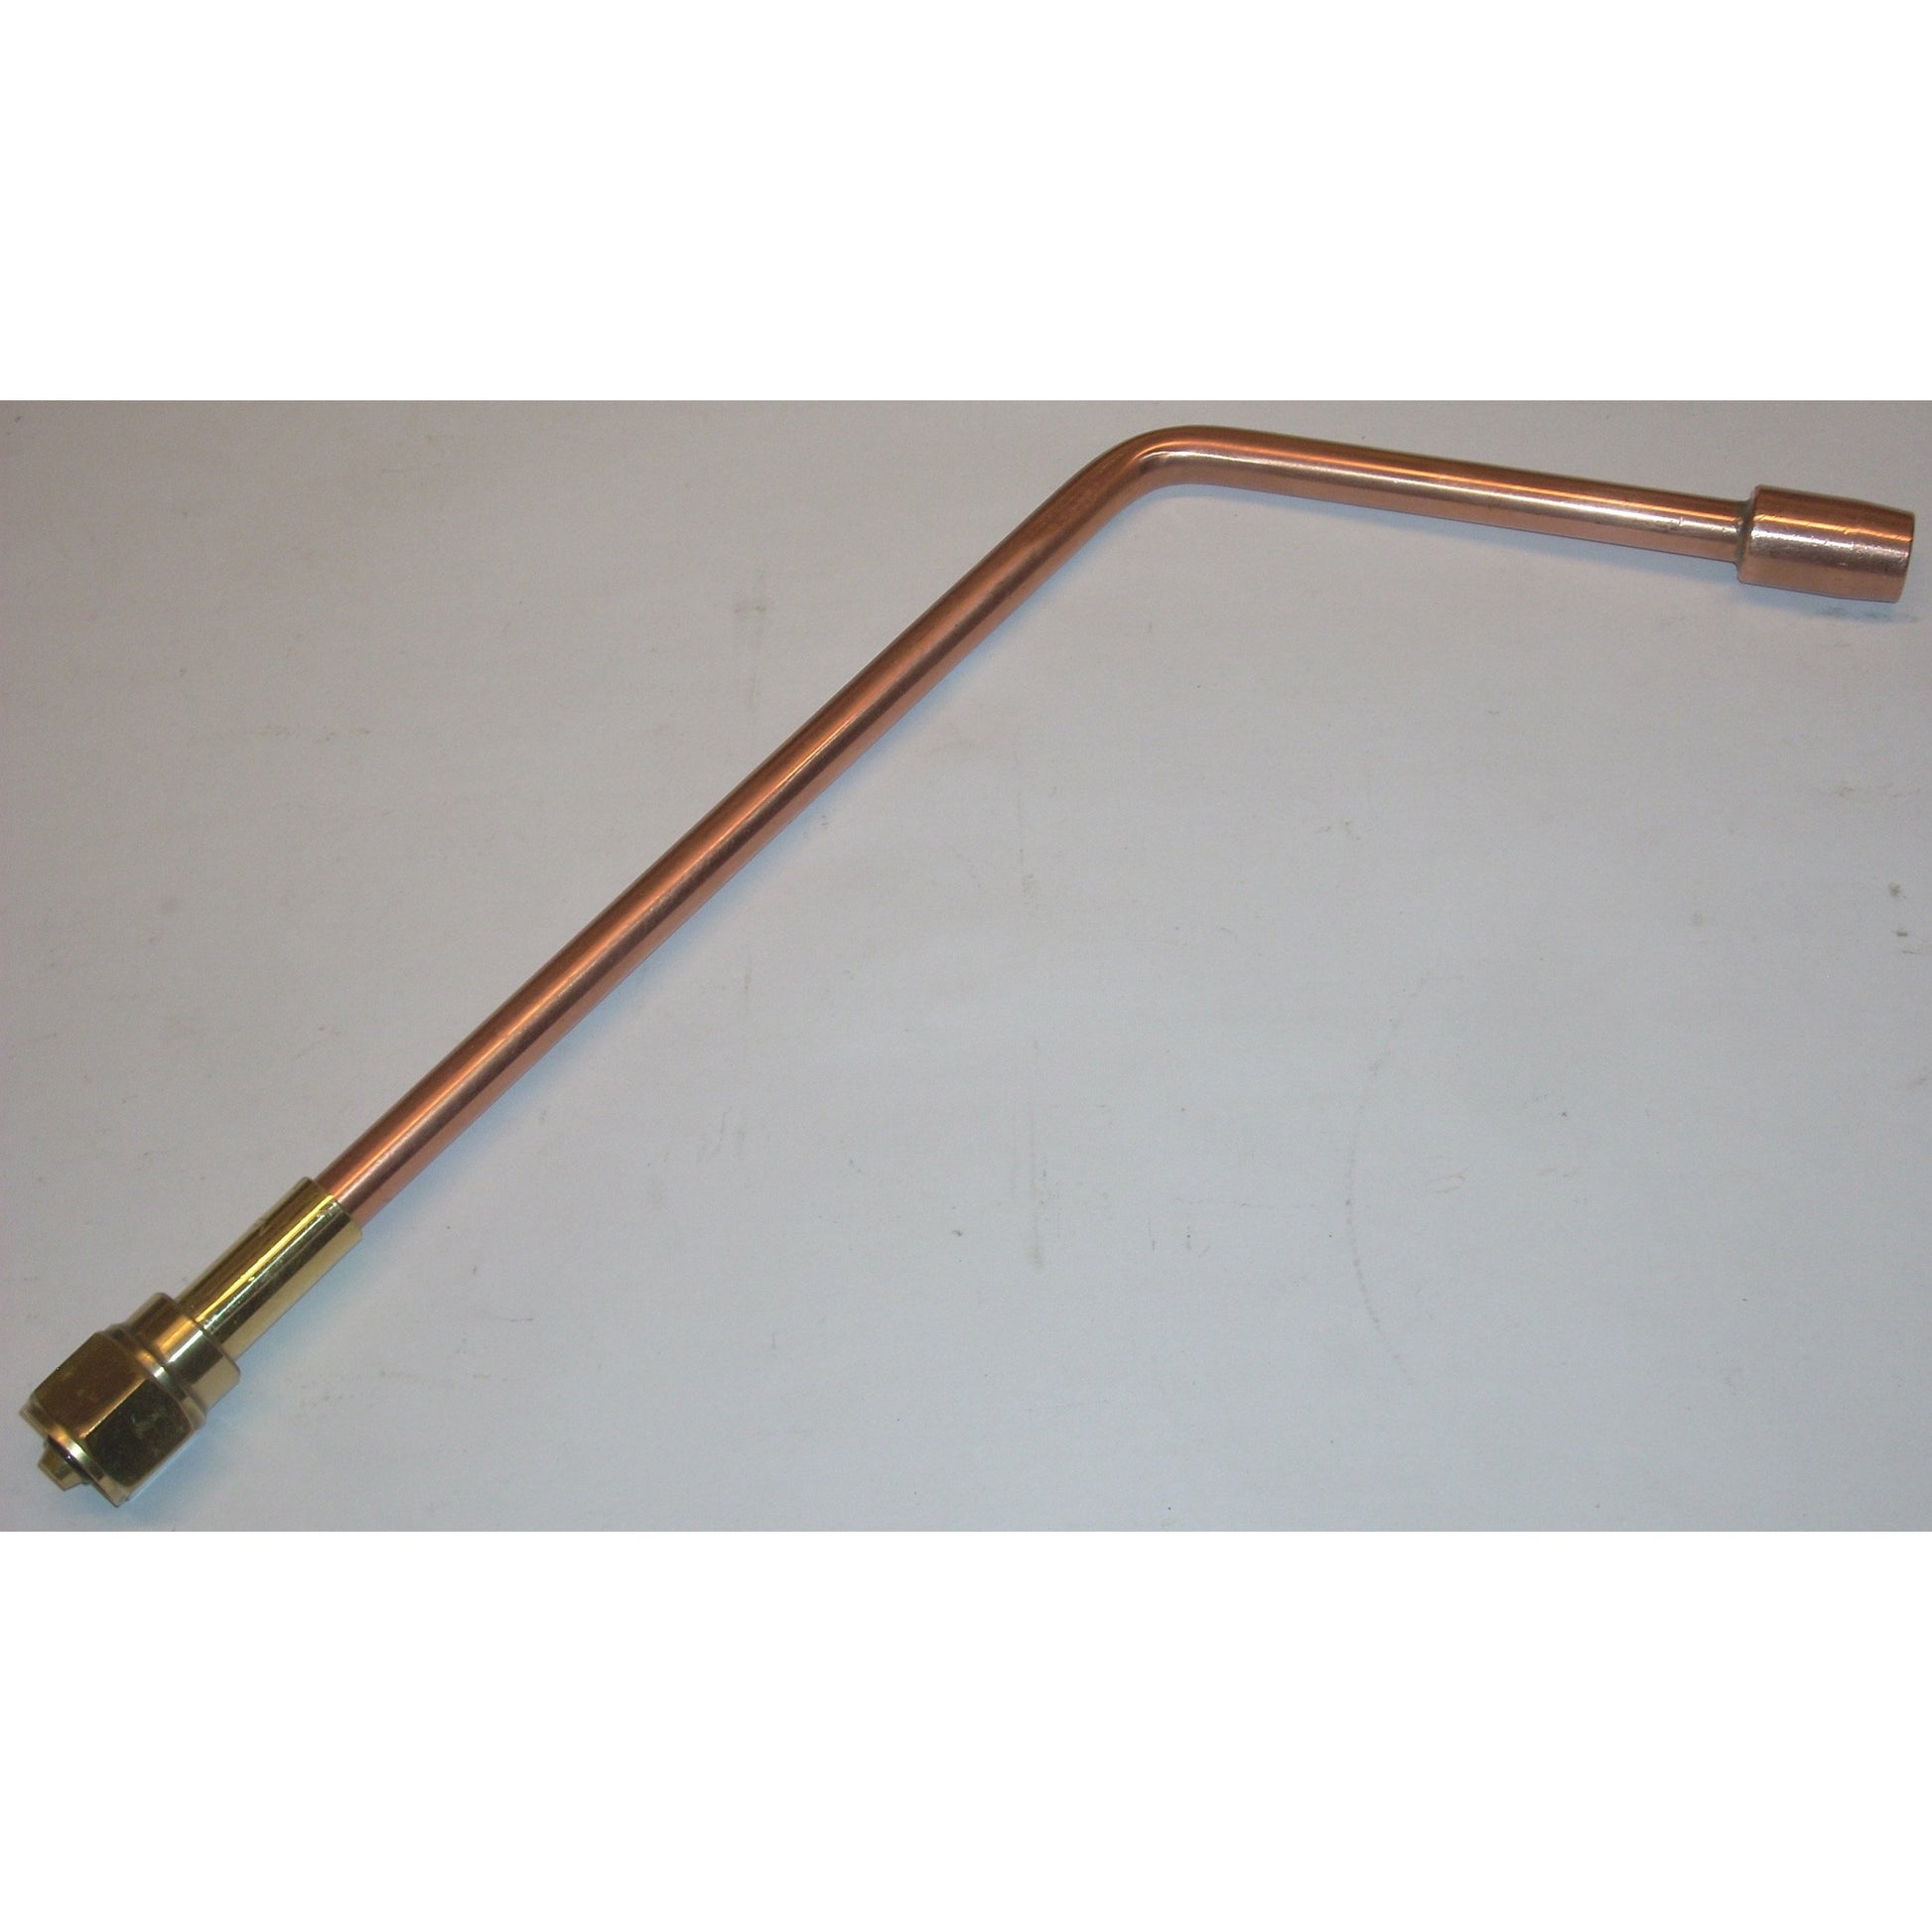 Victor style 15-MFN Heating Tip Rosebud LP, Propane or Natural Gas - ATL Welding Supply